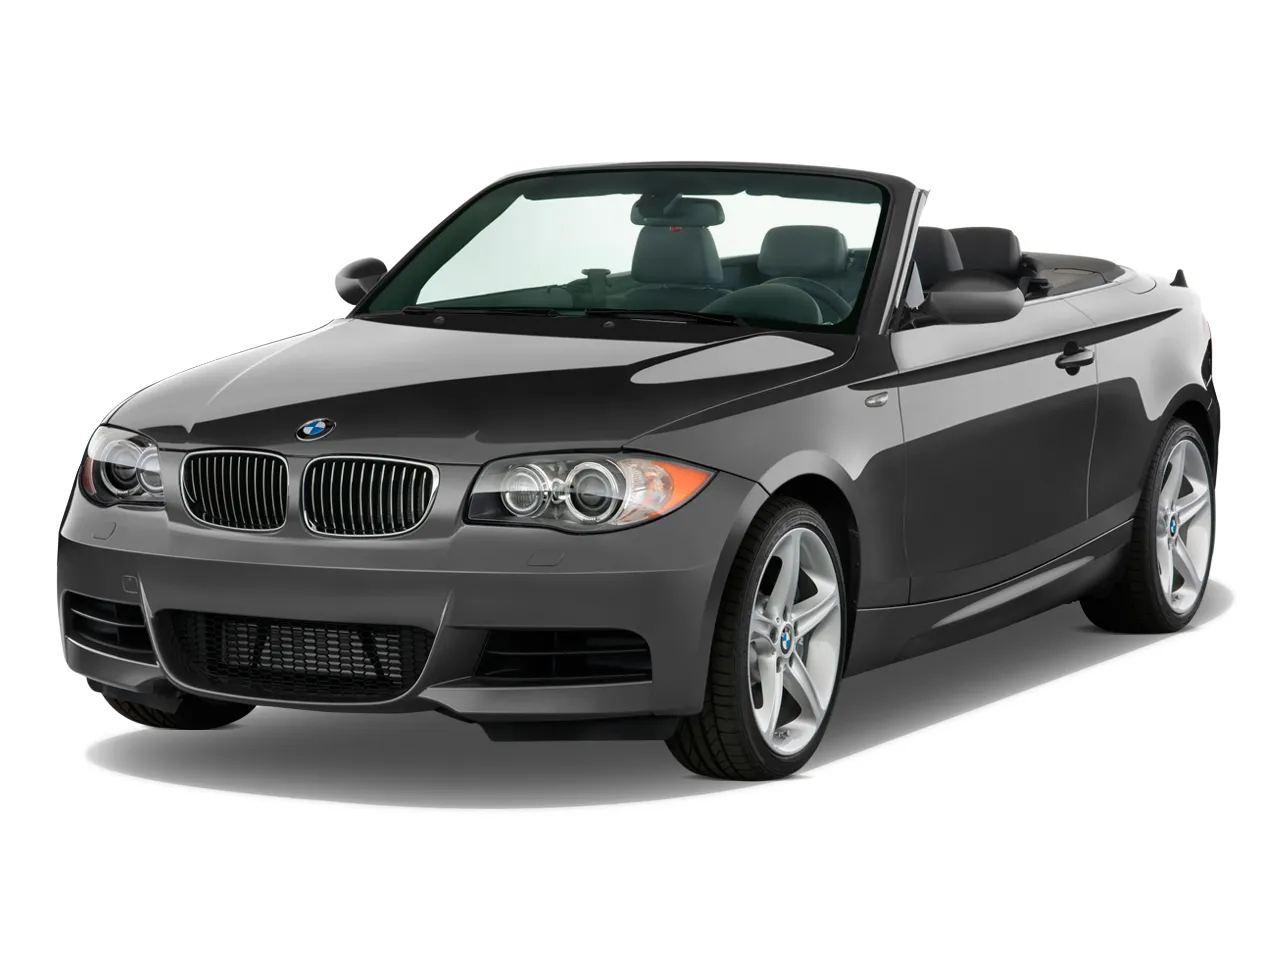 BMW 1 series 135is 2011 photo - 1